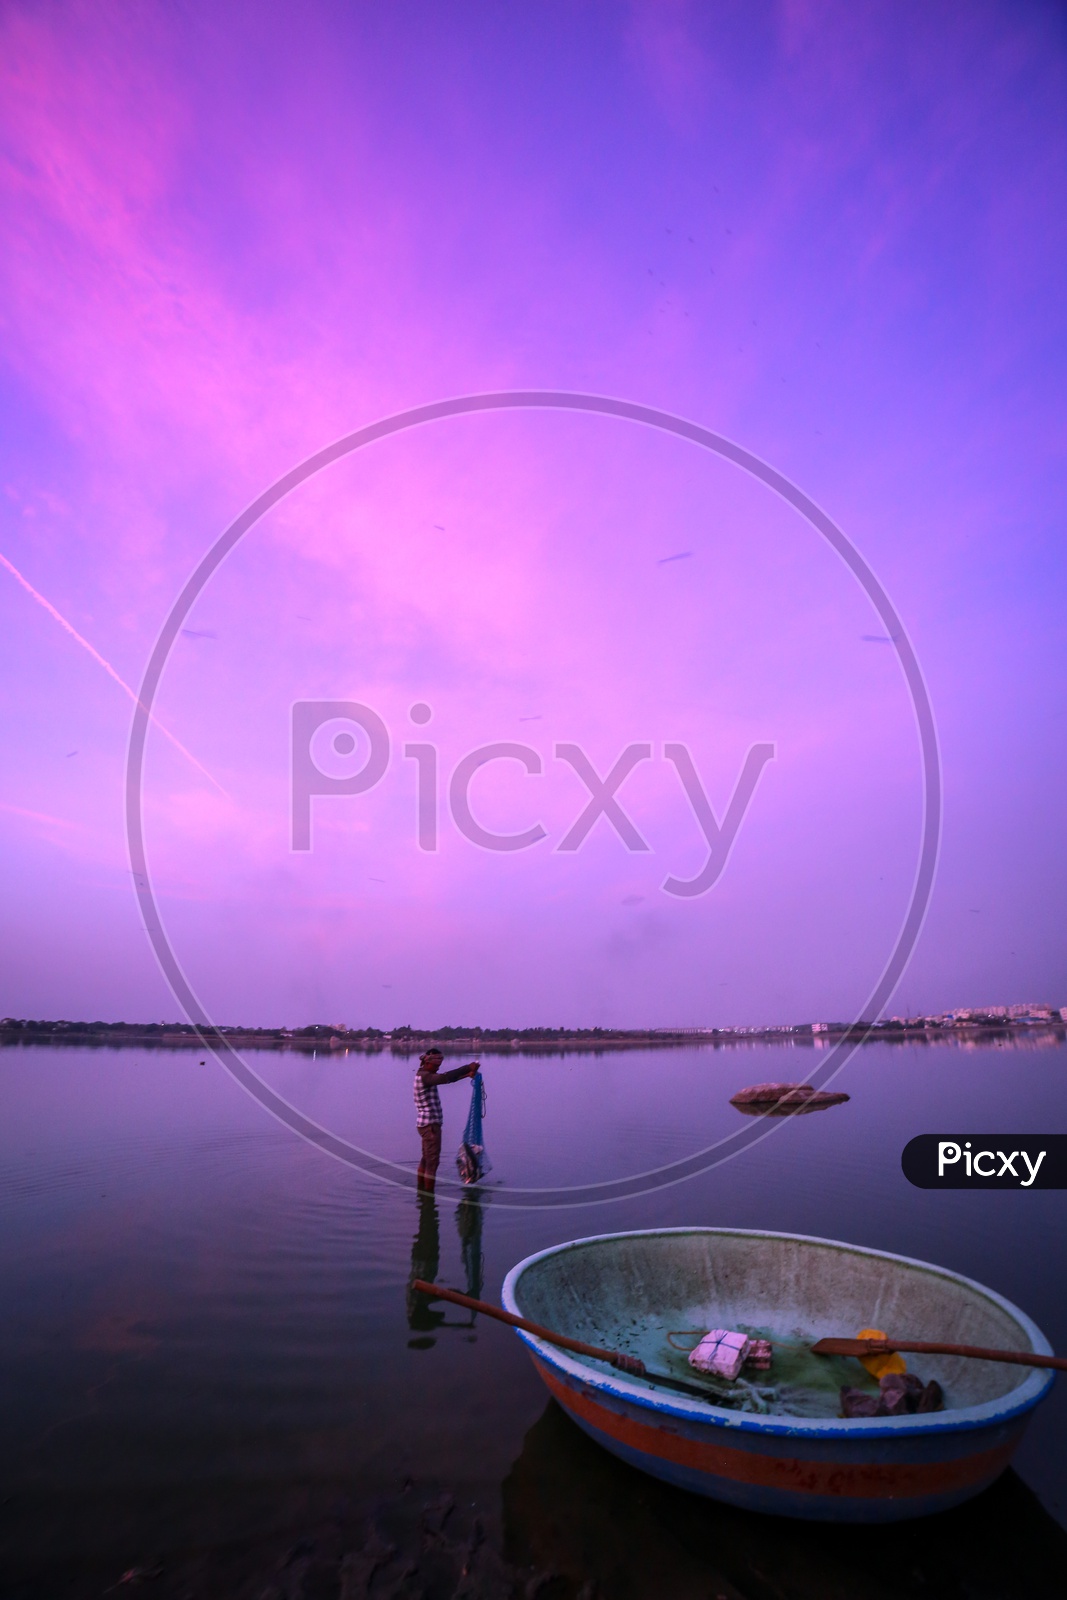 A Fisherman With Fishing Net In a Lake With a Blue Hour Sky Background